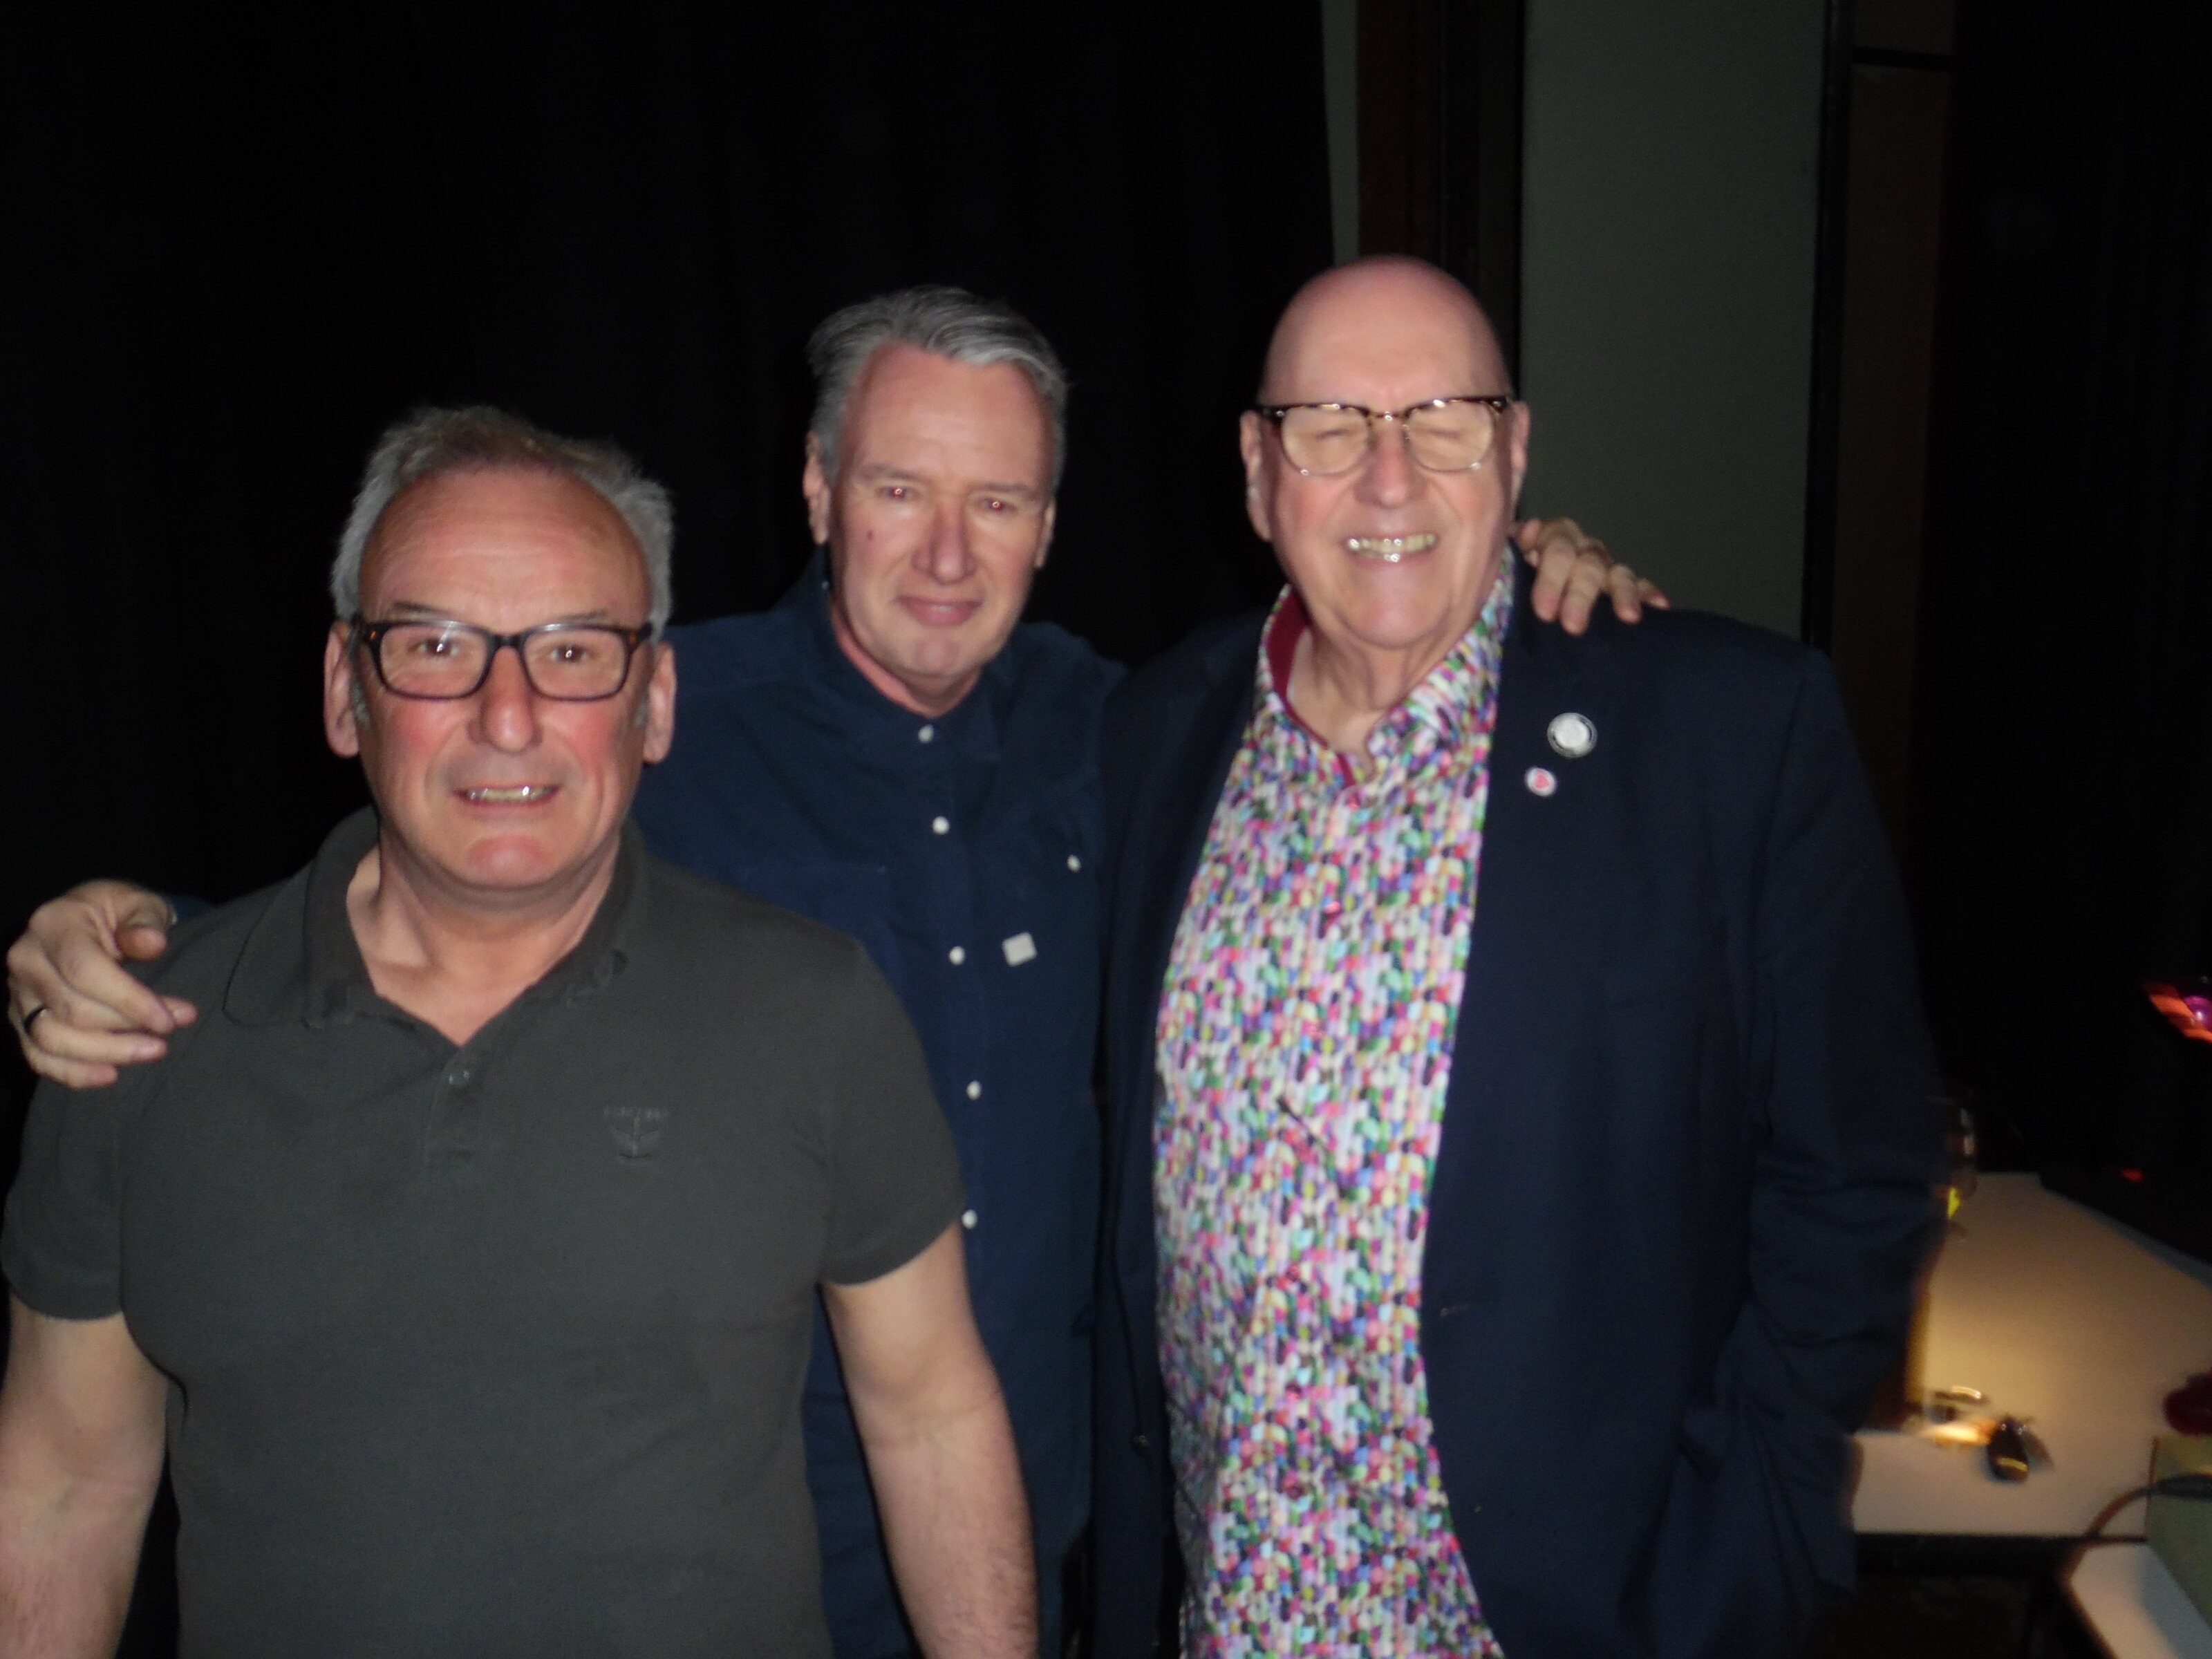 Culcheth with Ted Massey April 2019